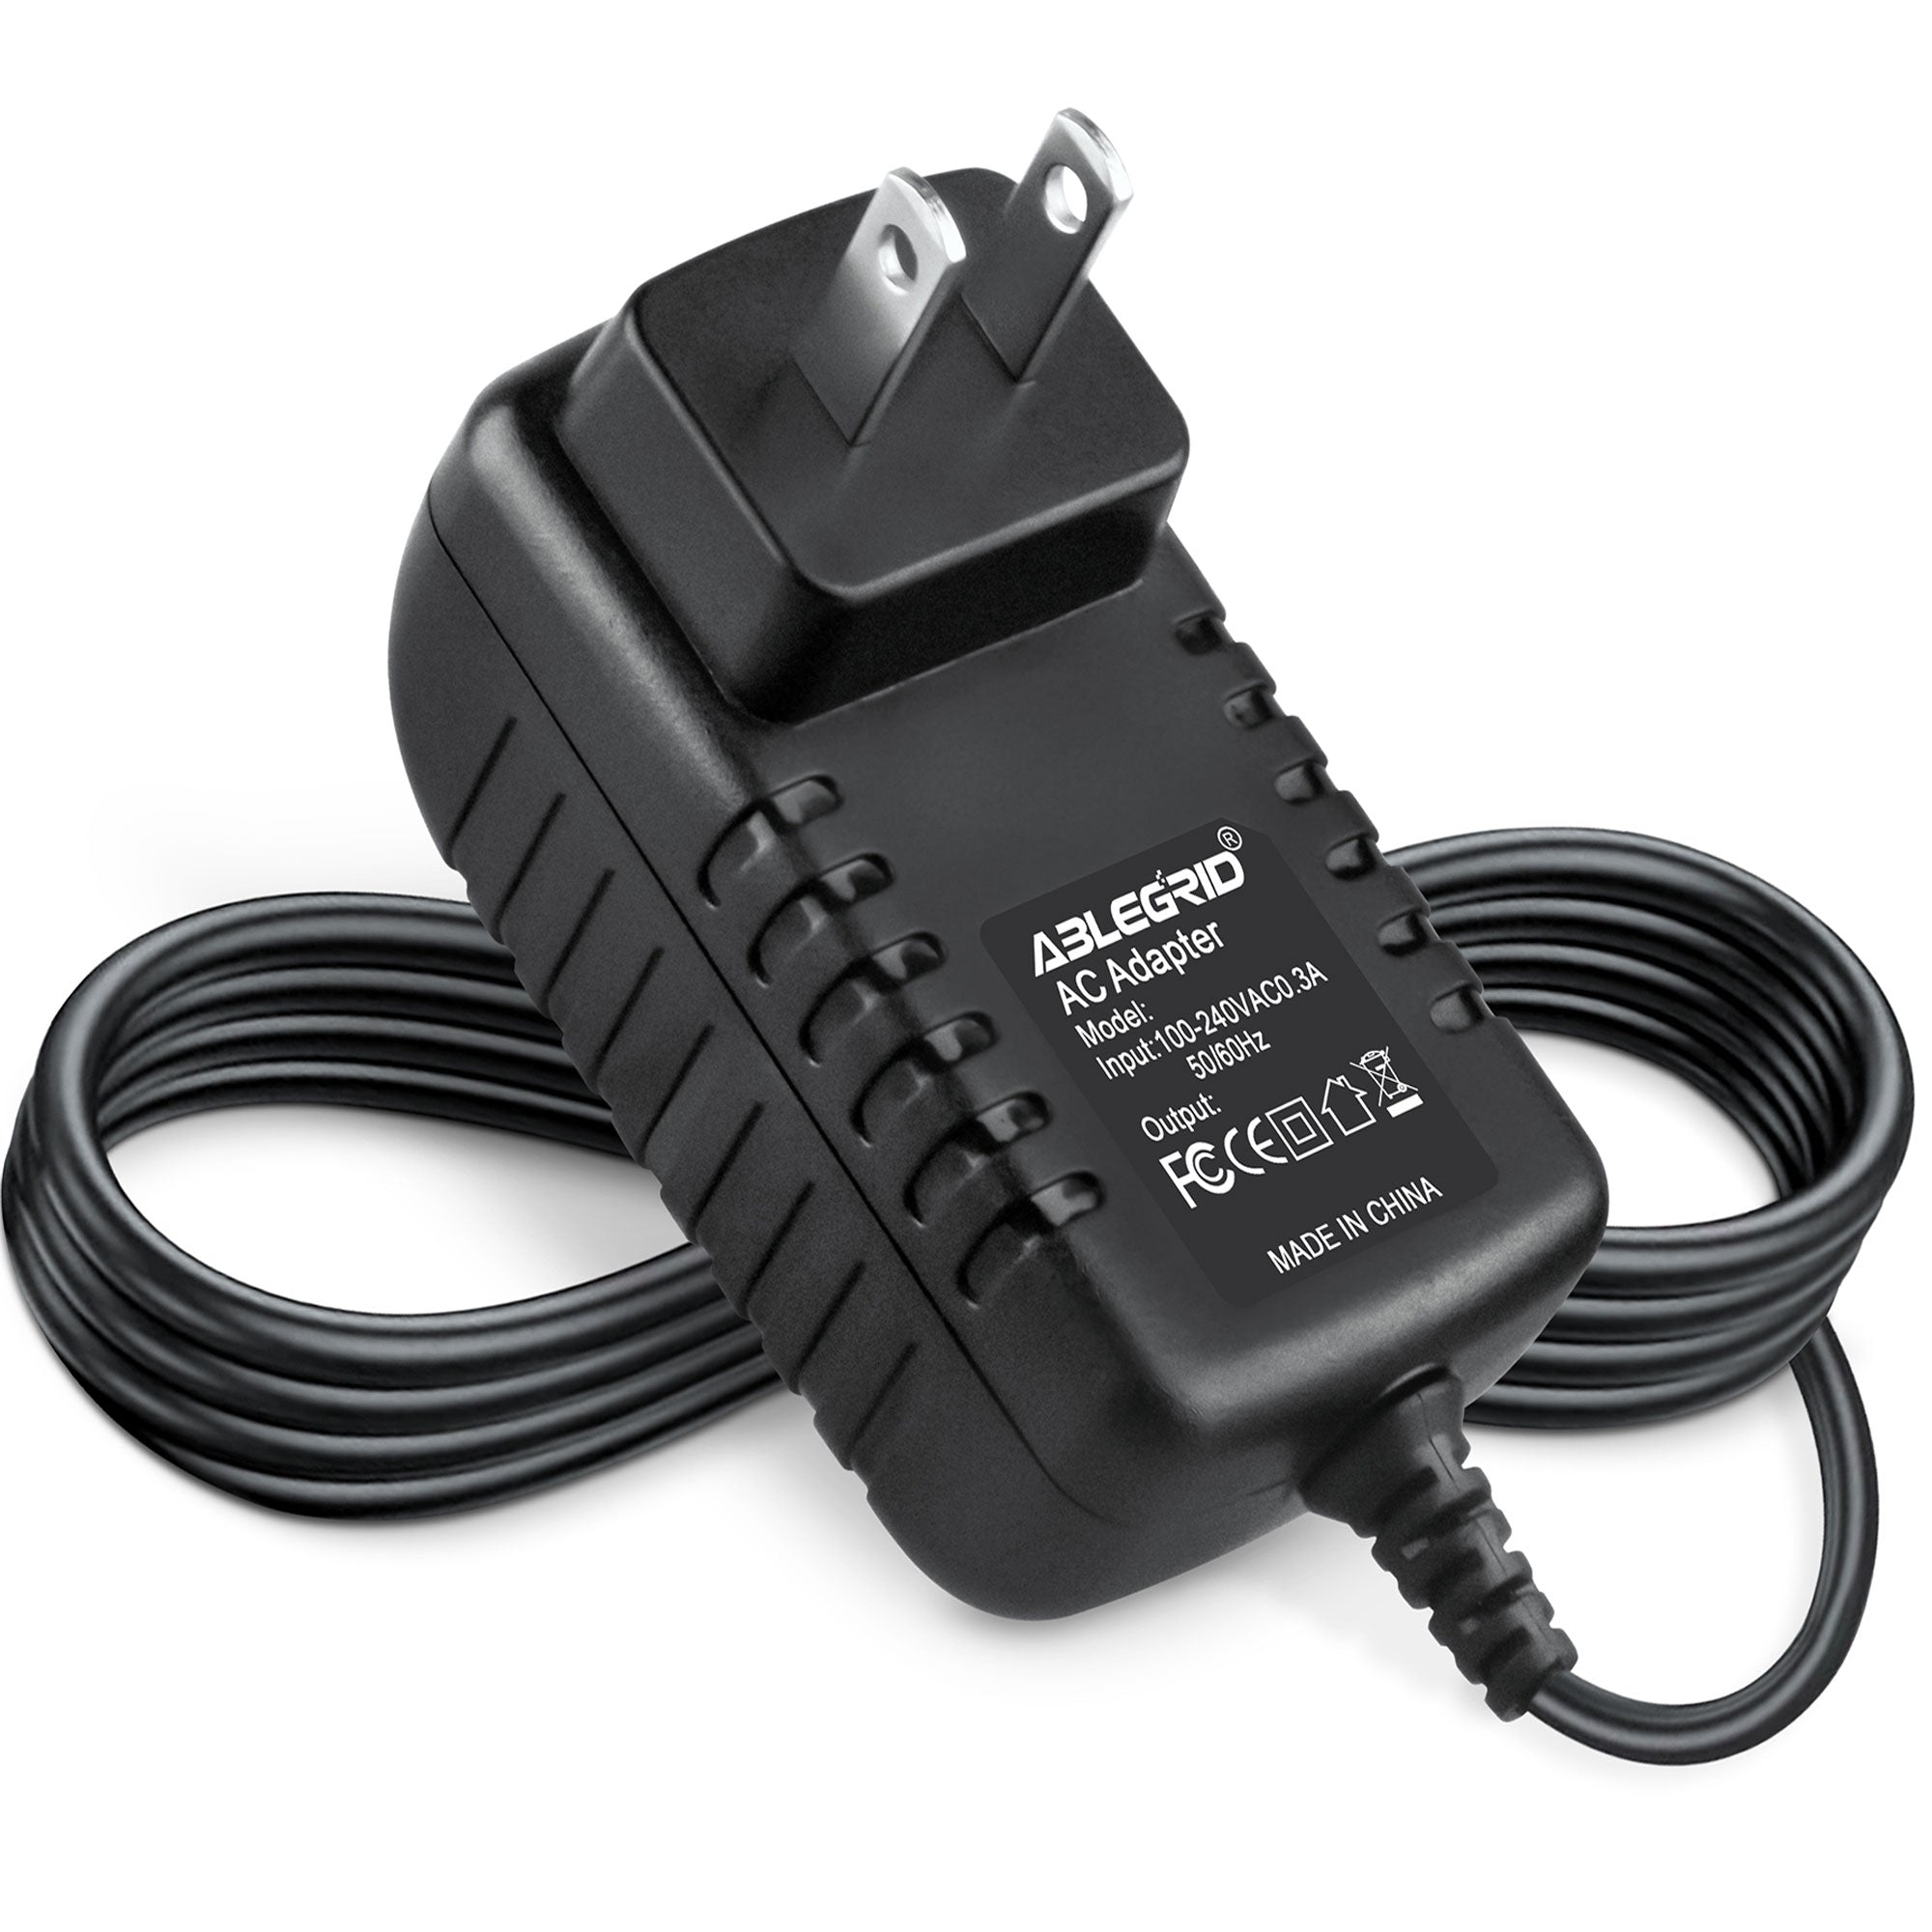 AbleGrid AC DC Power Supply Charger for Snap On Scanner Ethos Solus Pro & Ultra & Vantage Pro